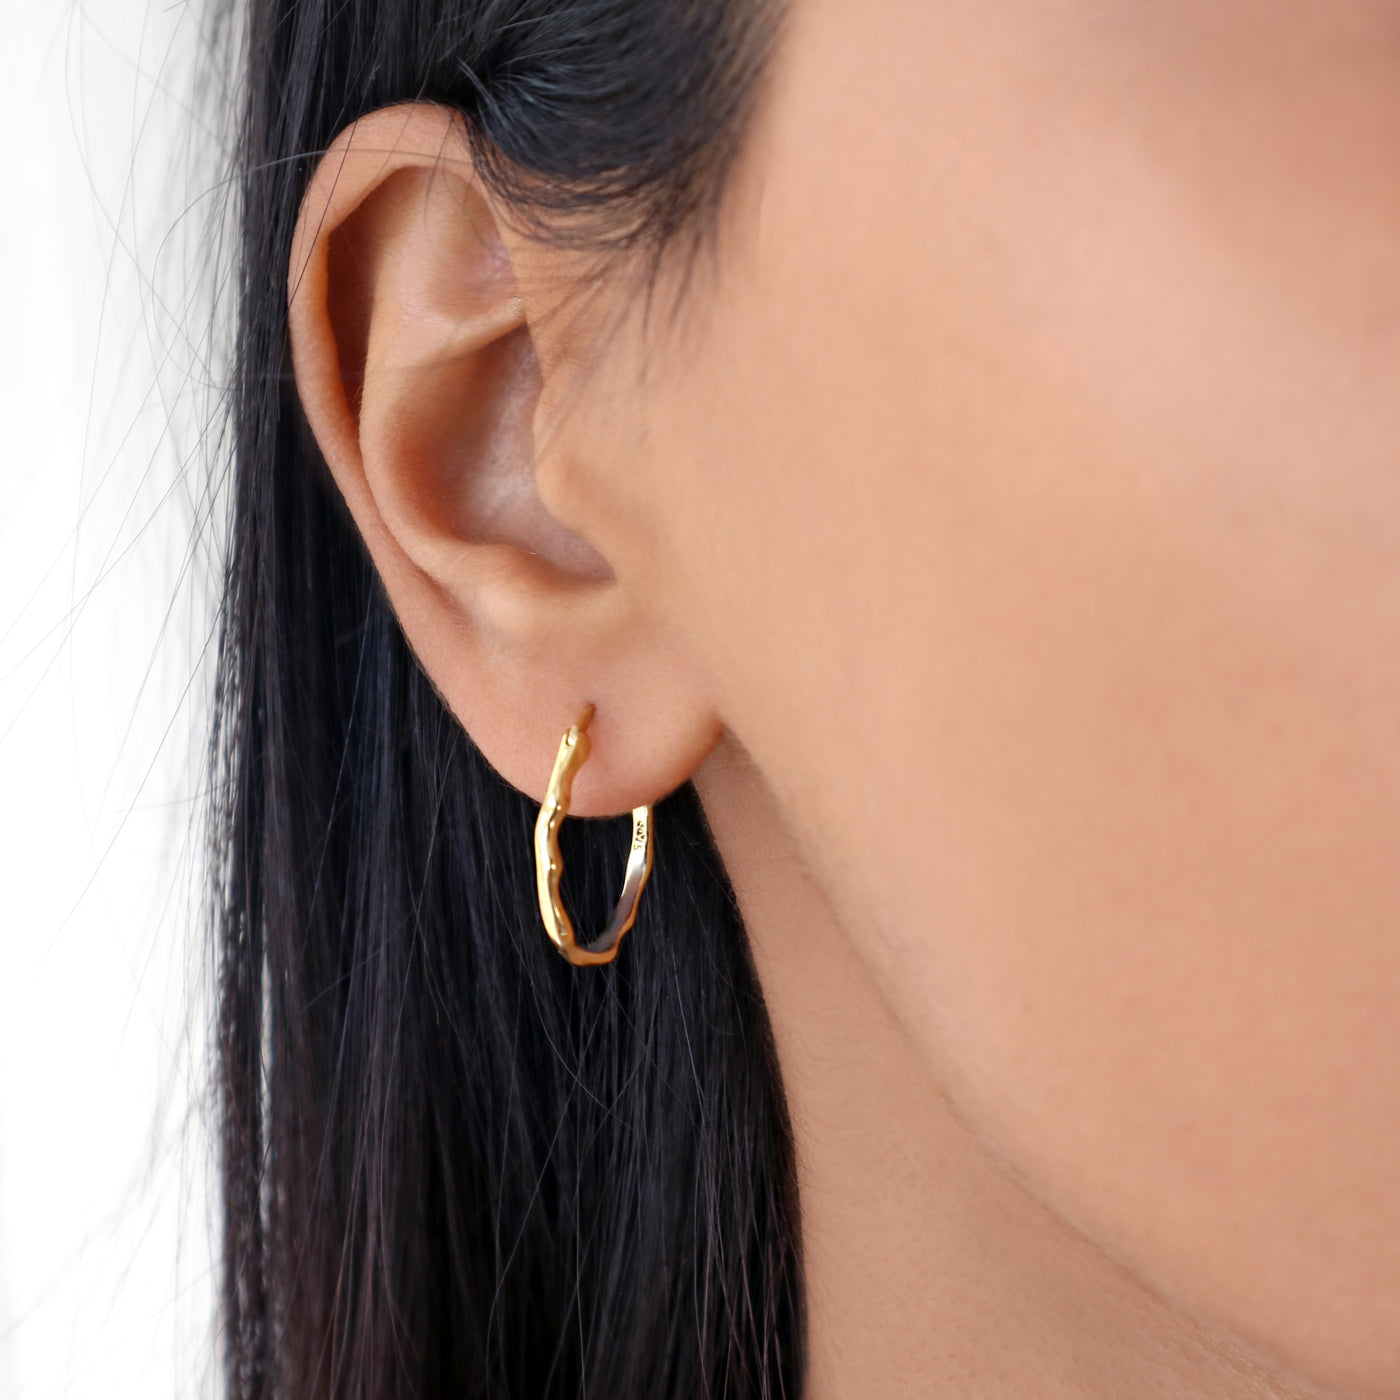 Minimal small irregular gold hoop earrings. Earring width & height: 2cm.Material: 18k gold-plated 925 sterling silver